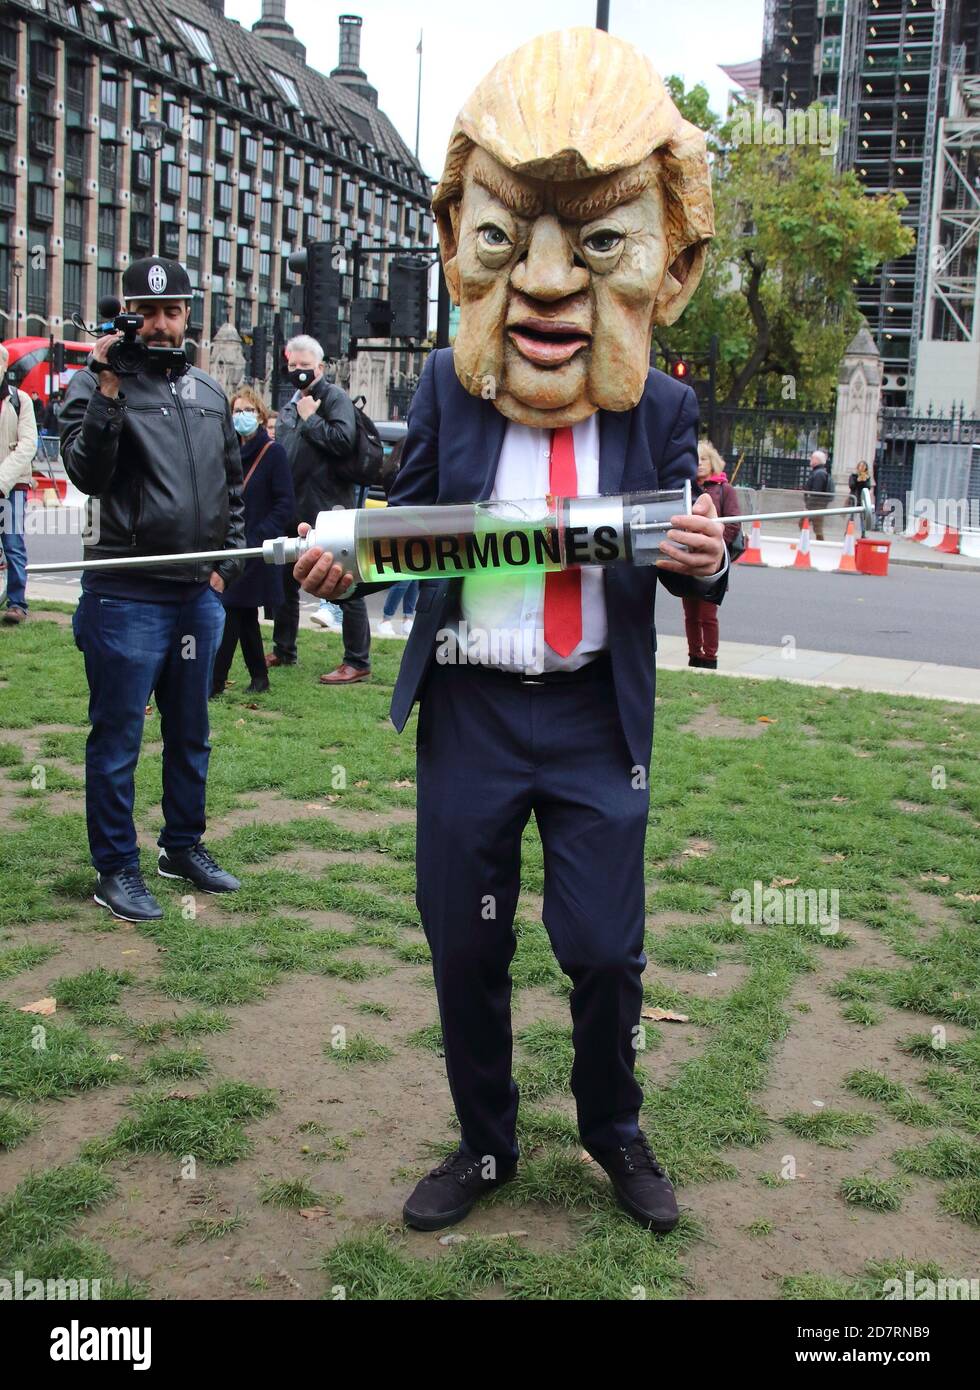 London, UK. 24th Oct, 2020. A man dressed in a fake Donald Trump and a businessman costume holds a huge hormones syringe at the Parliament Square during the protest.Stop Trump, Stop the post Brexit Trade Deal protest in Parliament Square. Action against the NHS being opened up permanently to American healthcare companies. Chlorinated chicken AND hormone-laced beef and lowering of food standards. Plus the forced deregulation of environmental laws and our rights to data privacy. Credit: SOPA Images Limited/Alamy Live News Stock Photo